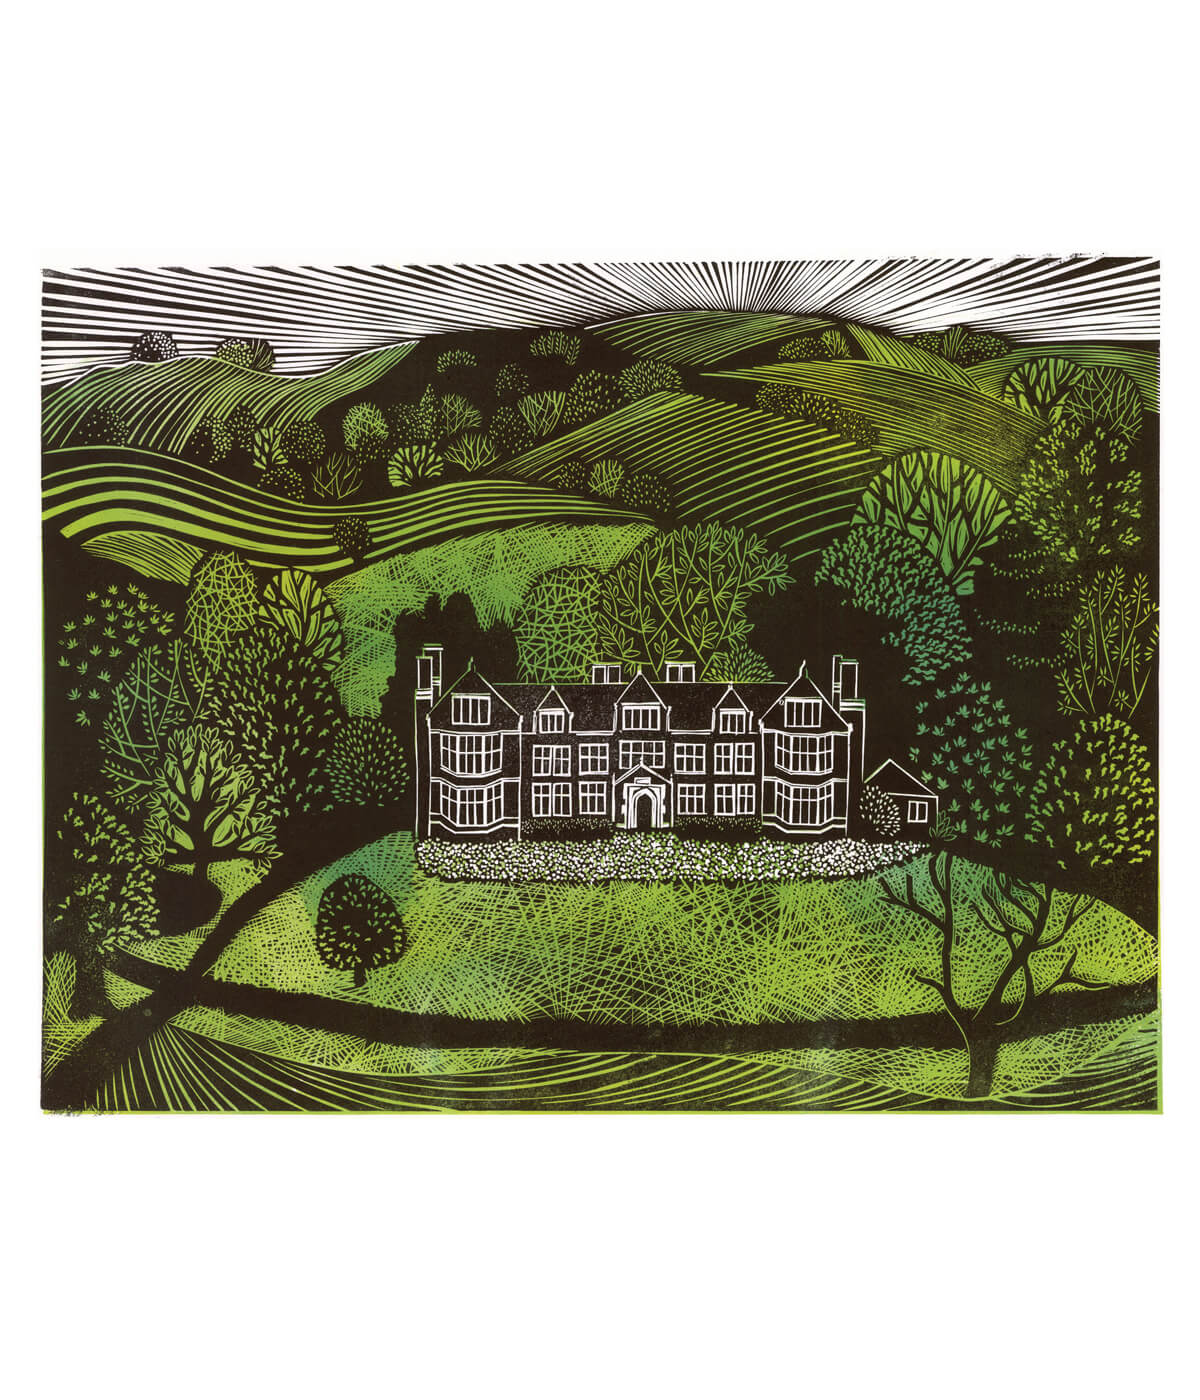 Launde Abbey, a linocut print by Sarah Kirby